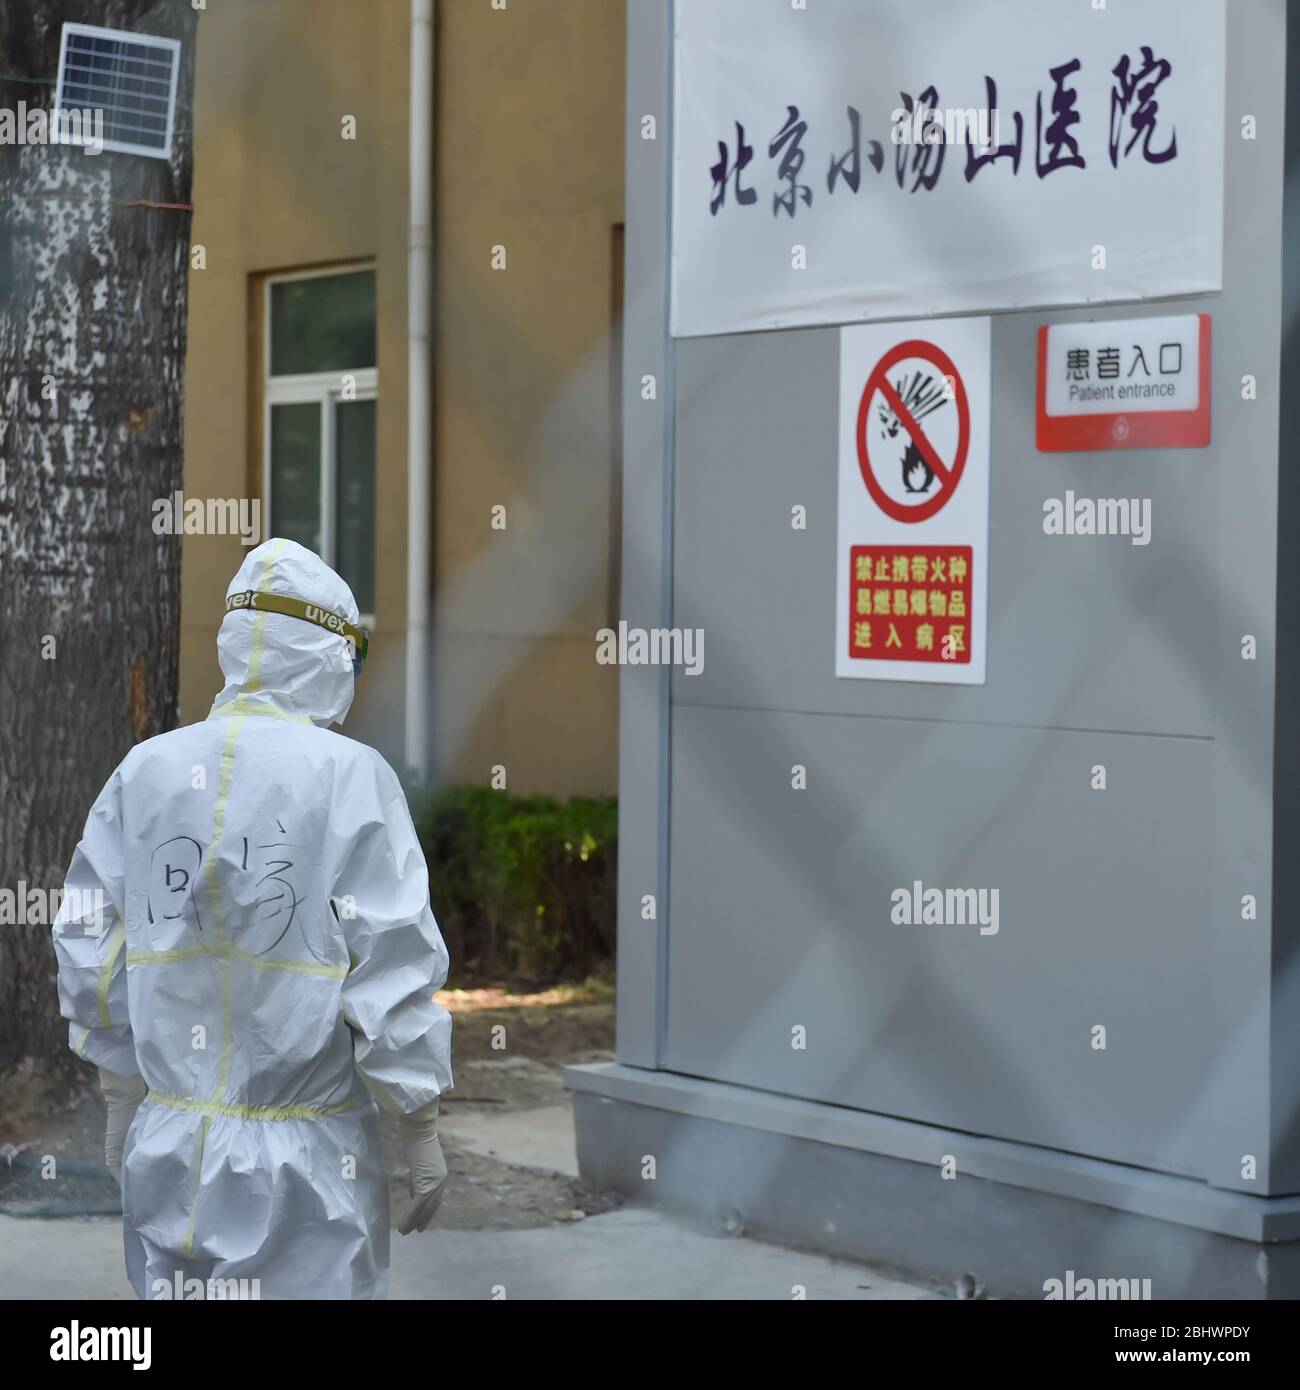 (200428) -- BEIJING, April 28, 2020 (Xinhua) -- A medical staff is pictured at Xiaotangshan Hospital in Beijing, capital of China, April 28, 2020. On the protective suit are two Chinese characters which read 'Going Home.' Xiaotangshan Hospital, which was previously used to quarantine SARS patients in Beijing, cleared all COVID-19 cases Tuesday and is scheduled to cease operation Wednesday. The hospital, located in the city's northern suburb, was renovated and put into operation on March 16 for the screening and treatment of imported mild and common confirmed COVID-19 cases, suspected cases Stock Photo